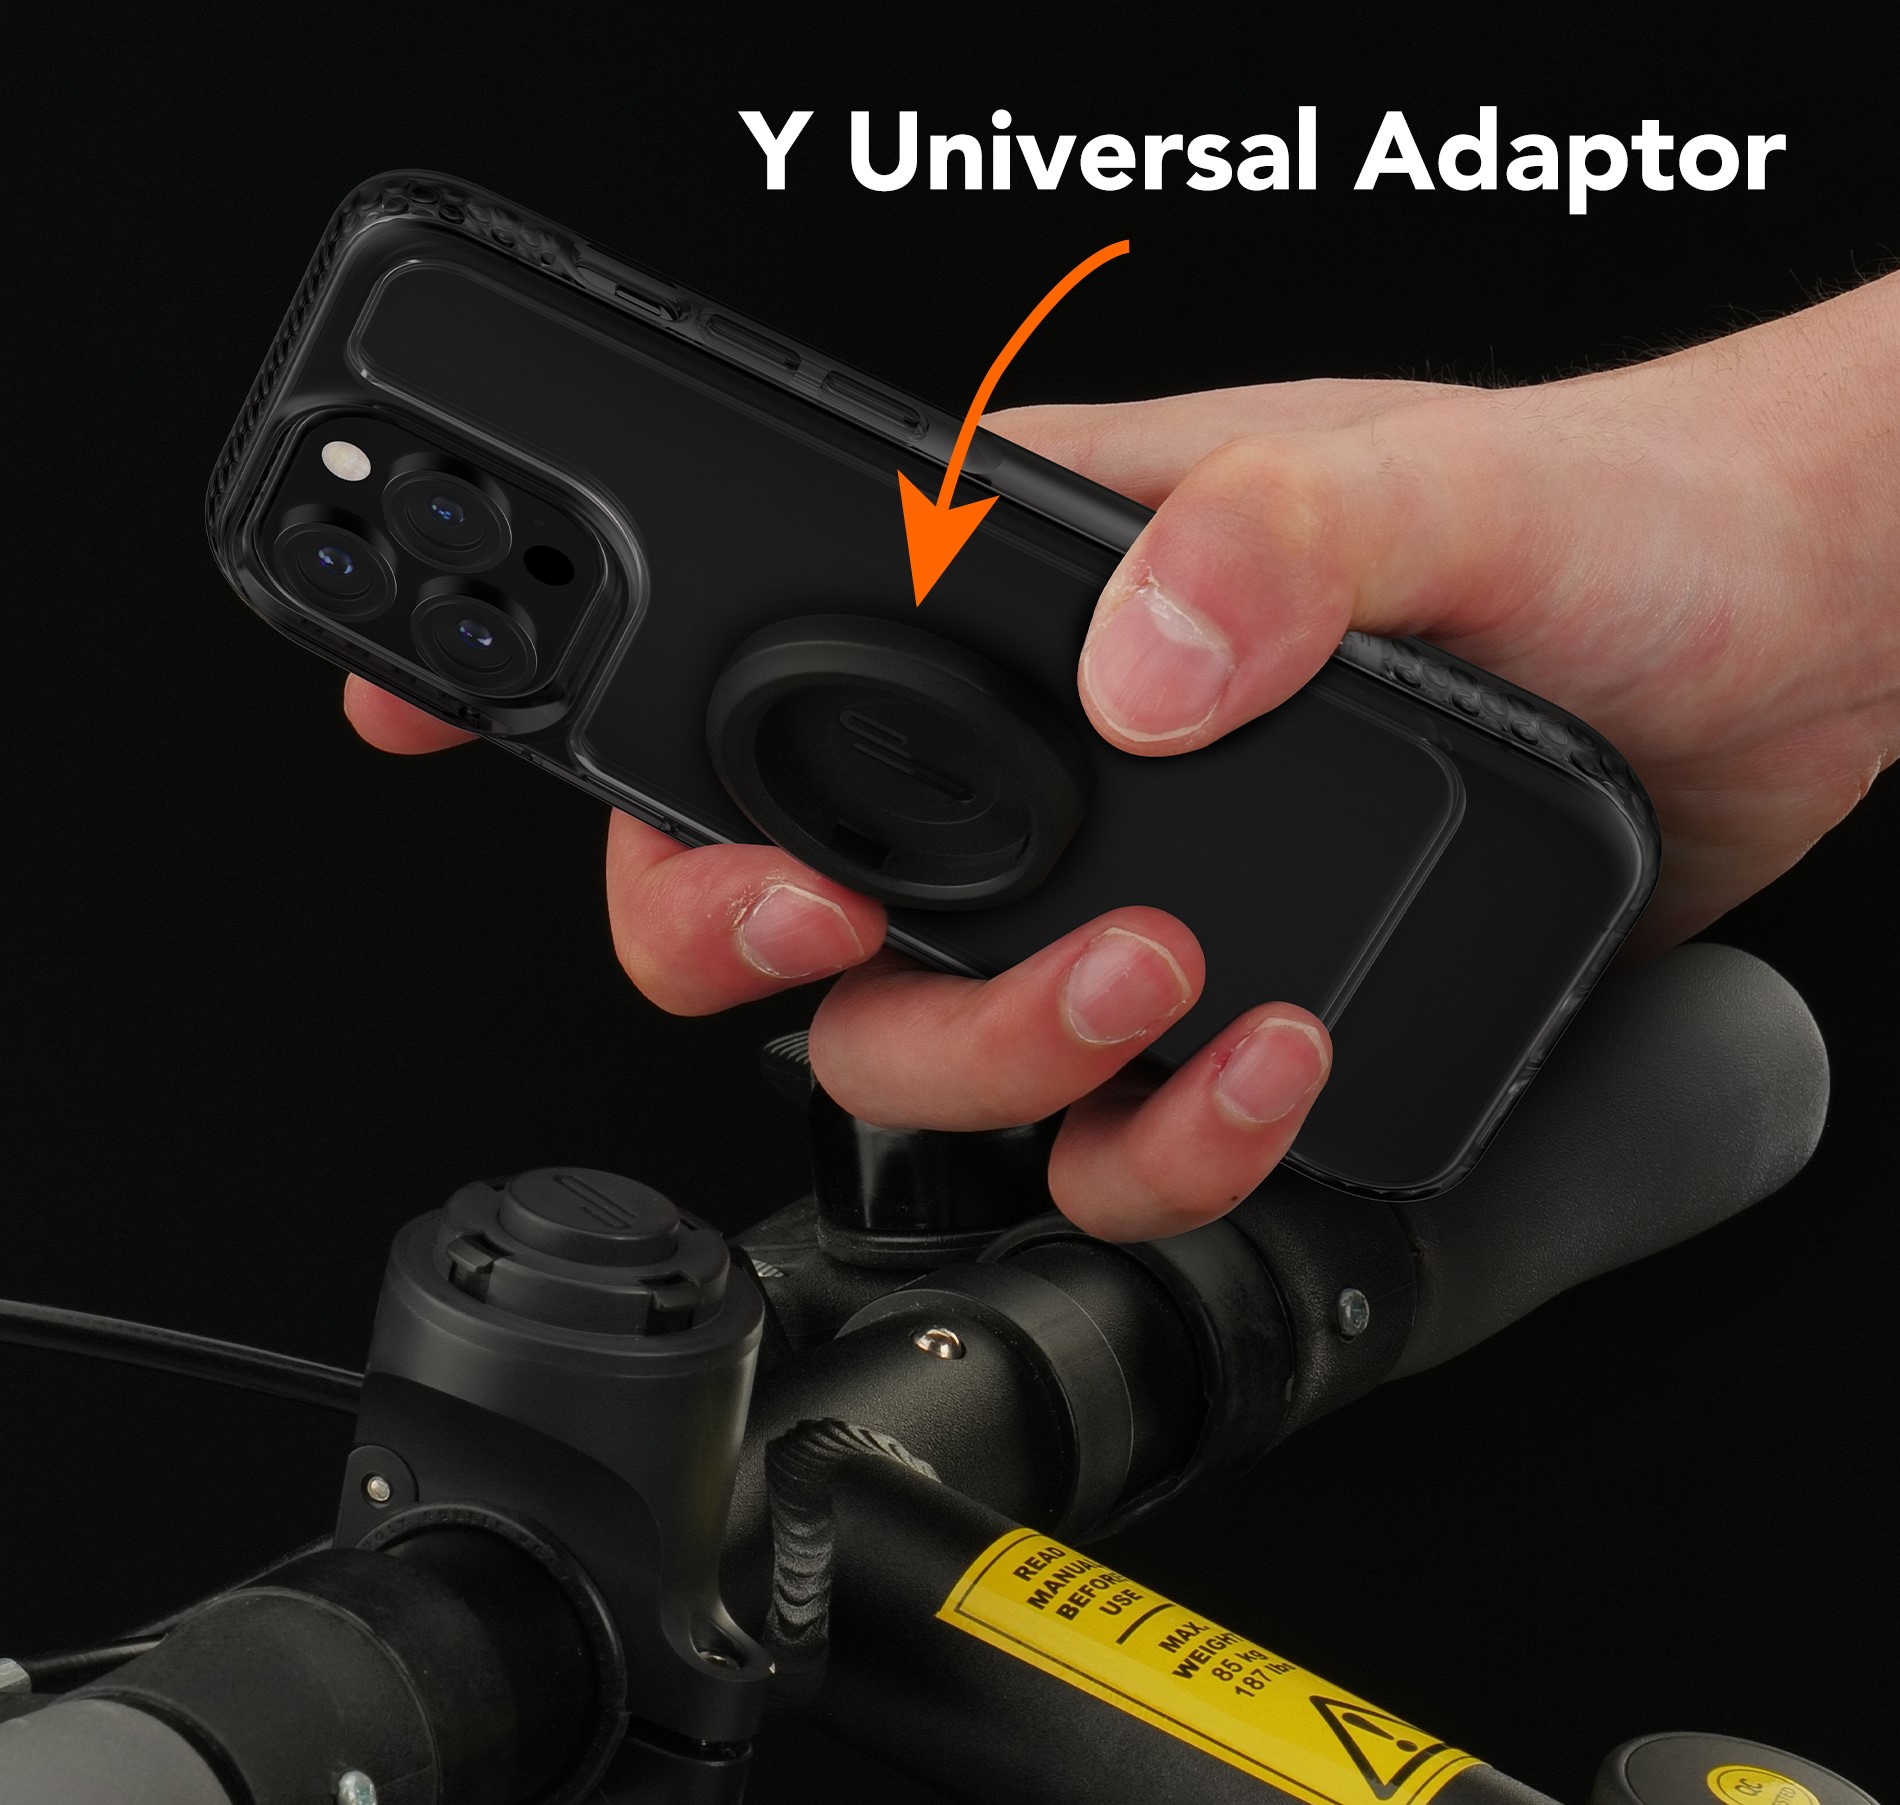 Ugly Rubber Launches Kickstarter Campaign For New Innovative Smartphone Mount